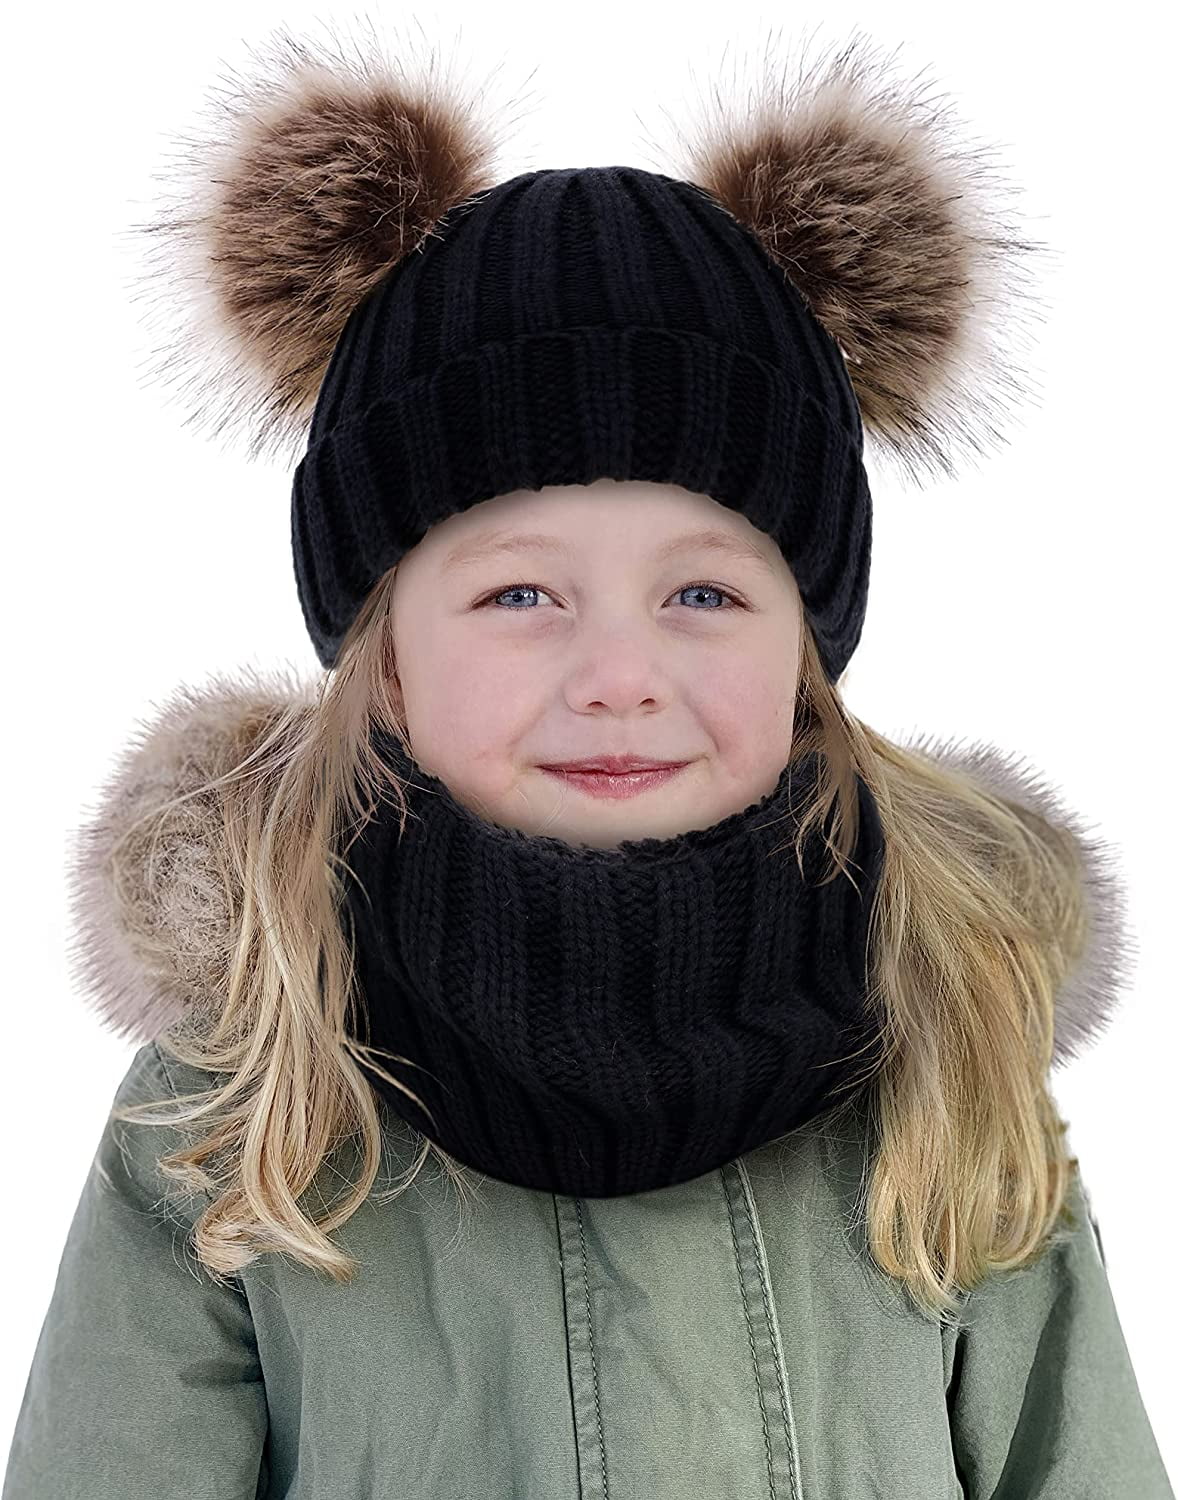 Kids Winter Warm Knit Beanie Hats Neck Warmer Scarf and Touchscreen Gloves Set with Pompom Fleece Lined for Boys Girls 